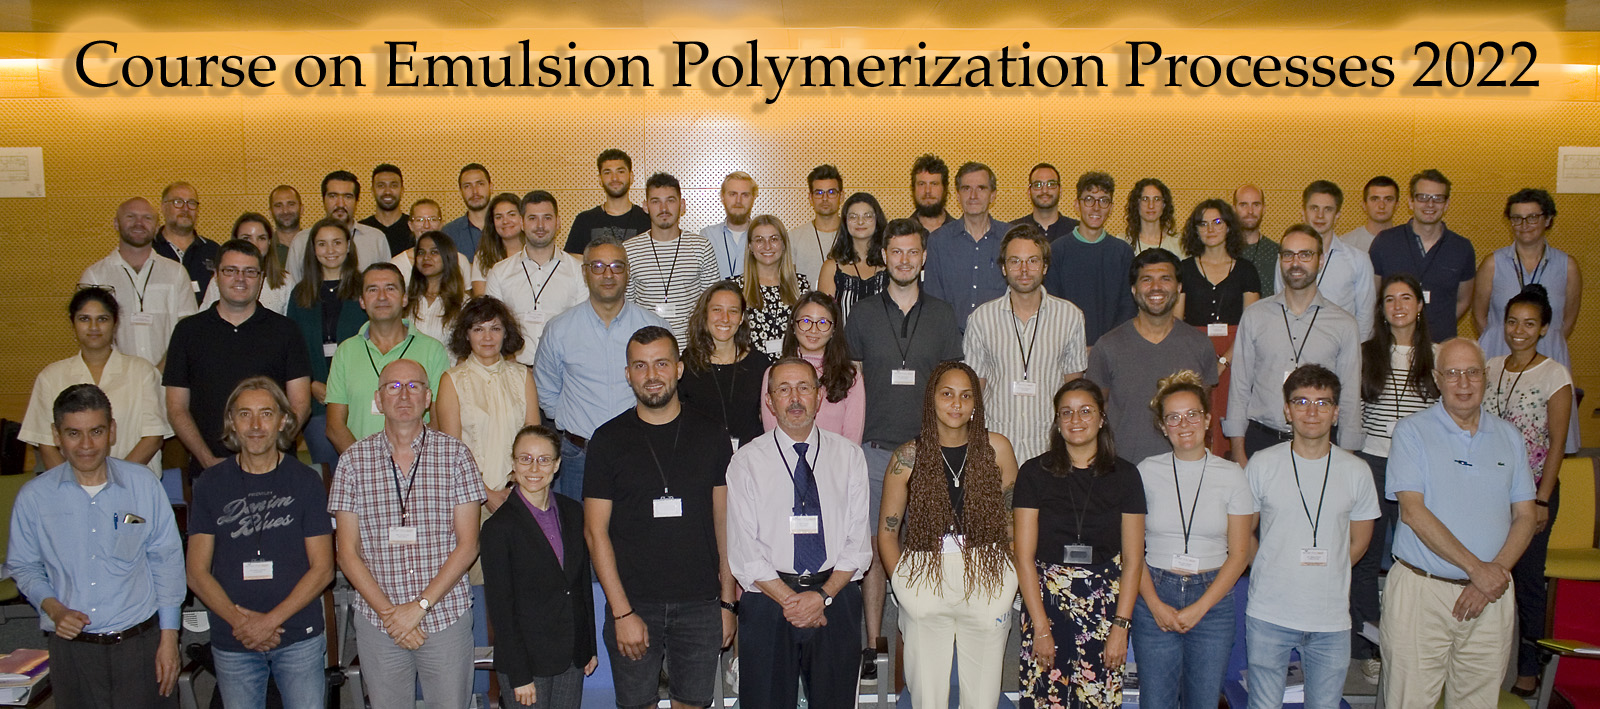 2022 Participants of the Course on Emulsion Polymerization Processes